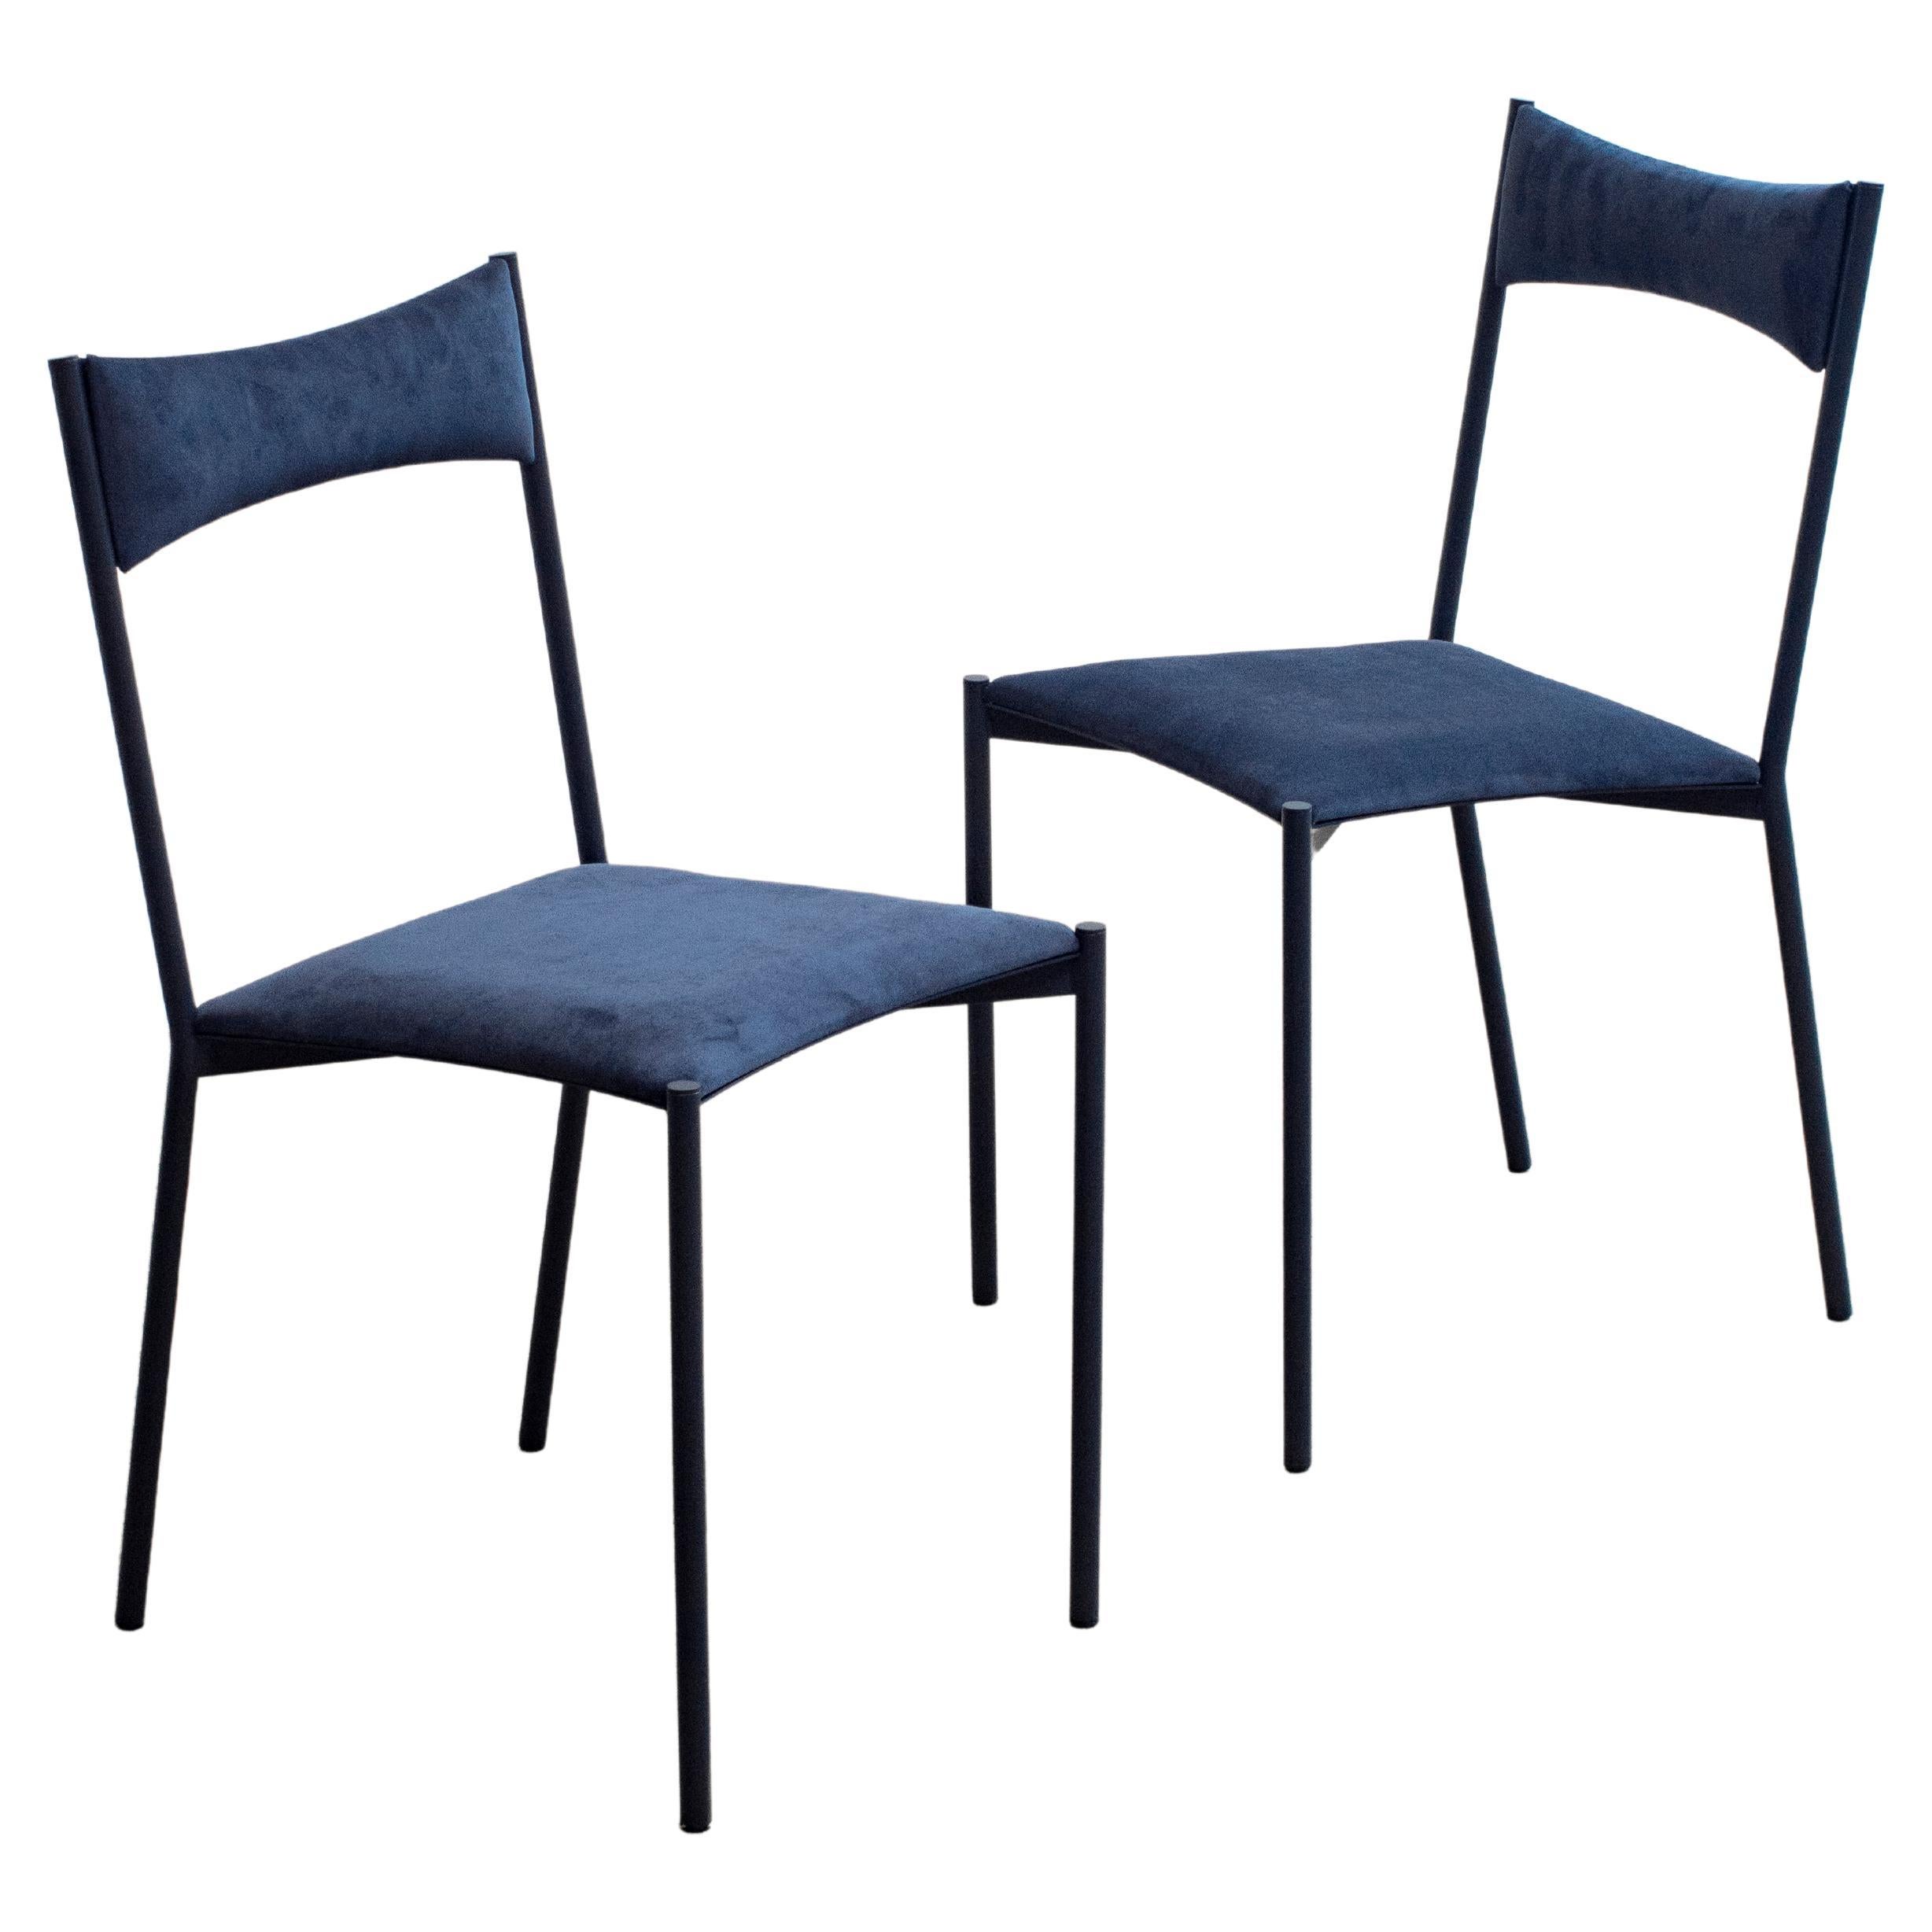 Set of 2 Tensa Chairs, Dark Blue by Ries For Sale